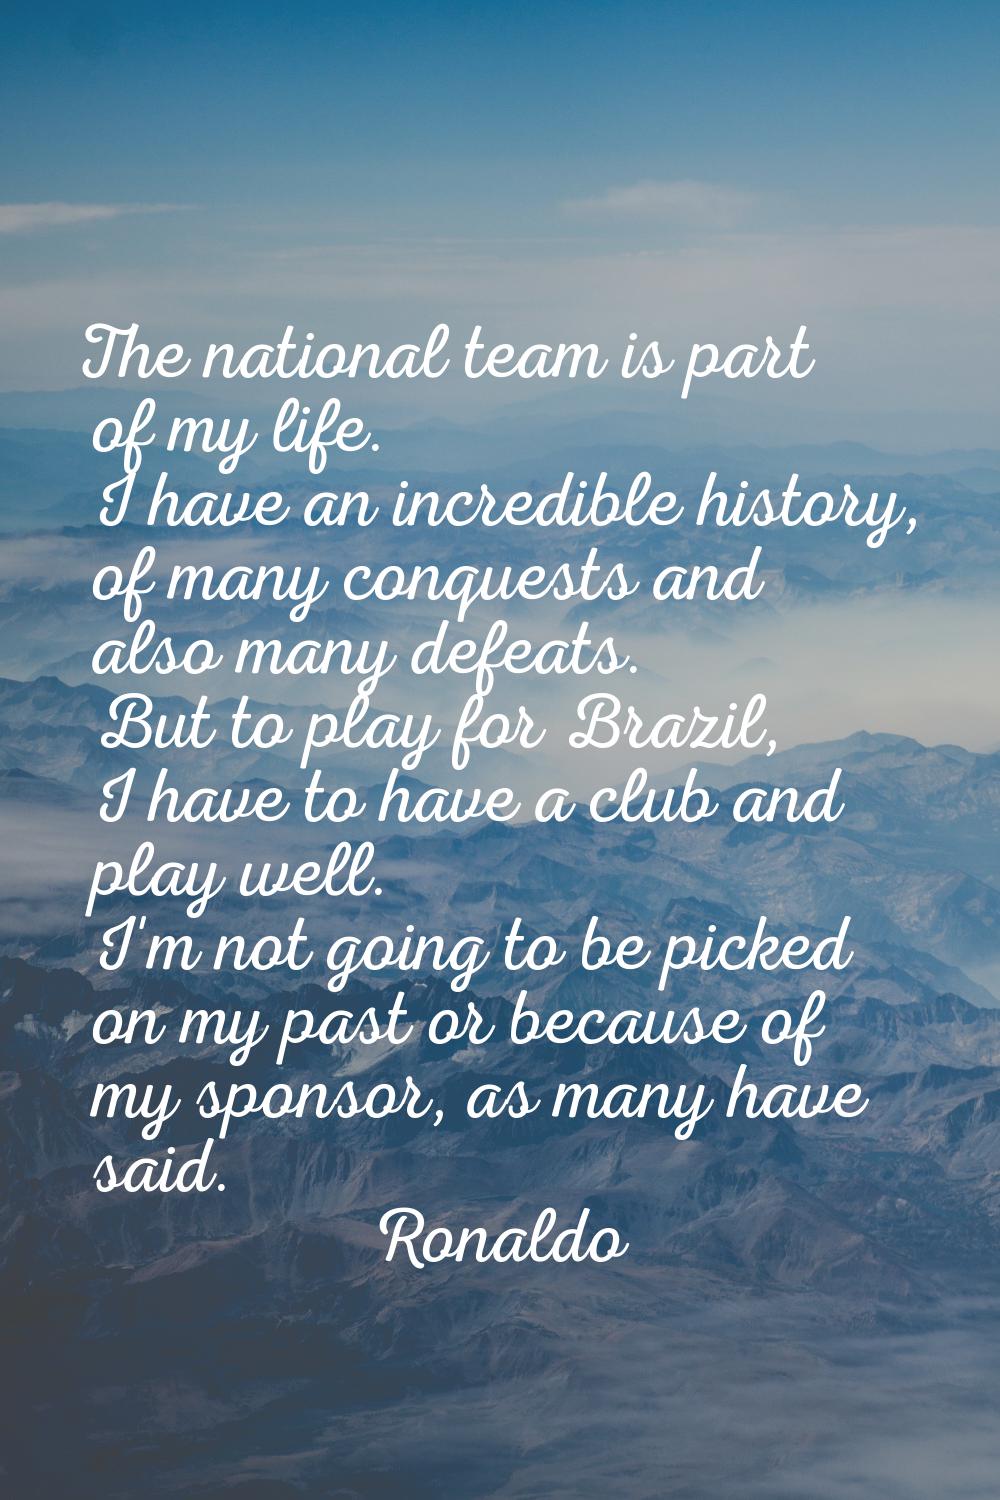 The national team is part of my life. I have an incredible history, of many conquests and also many